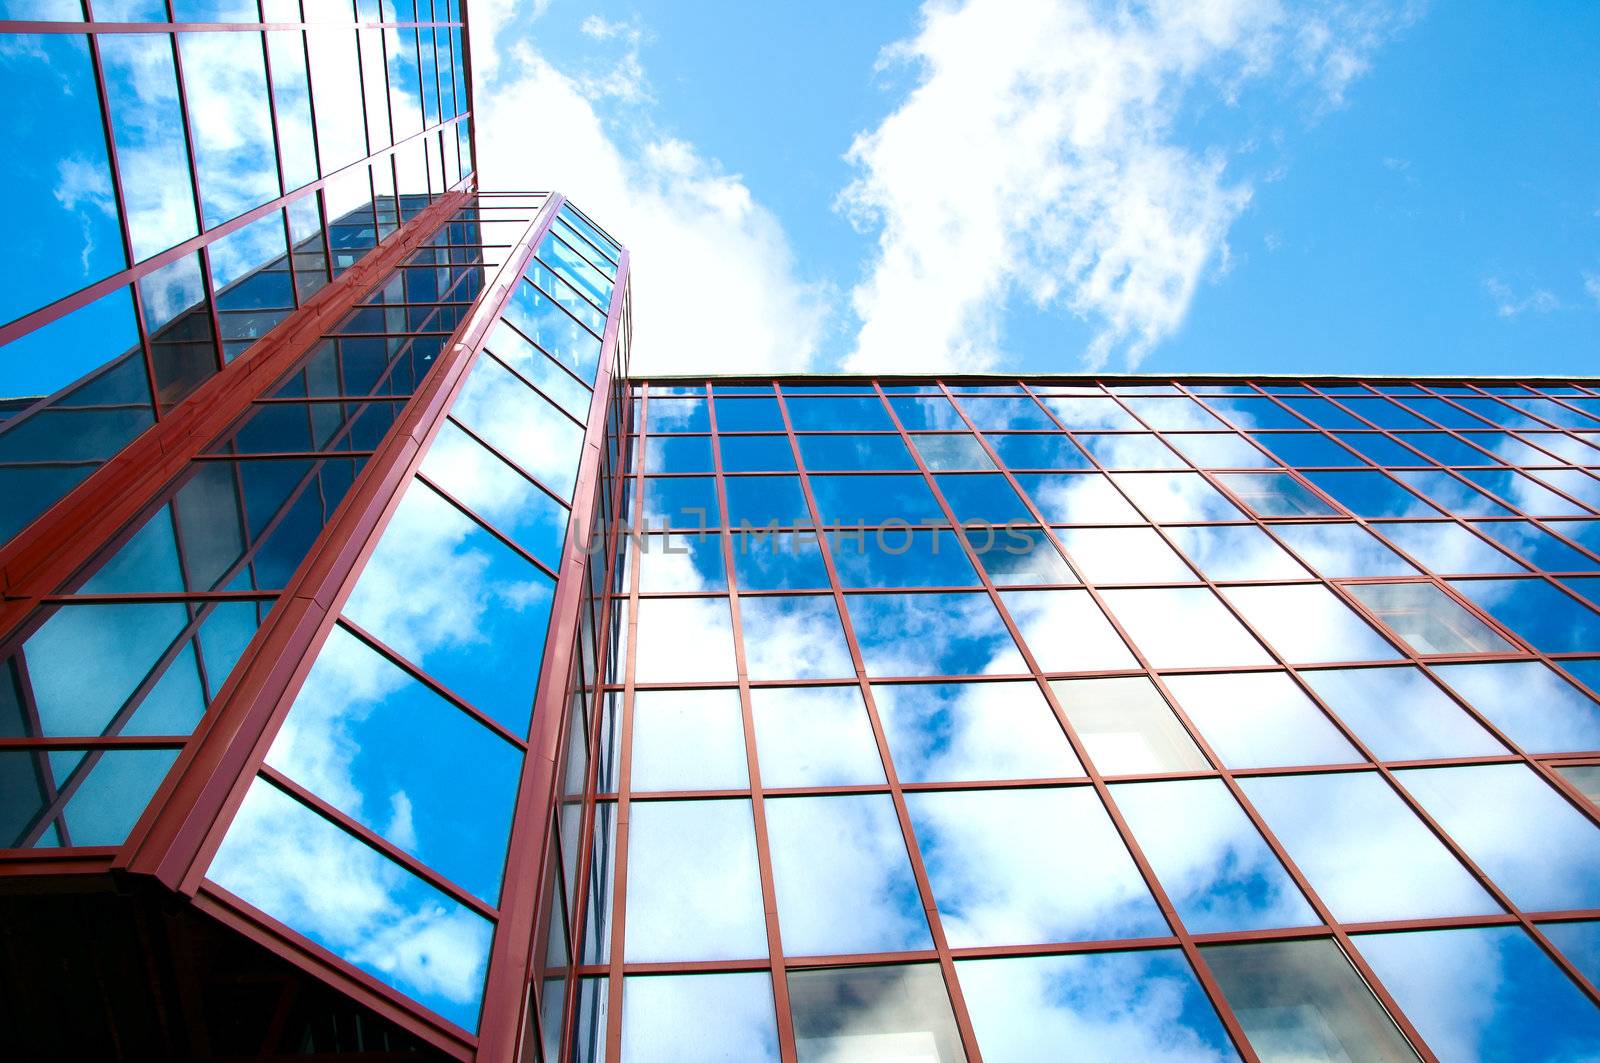 On office building charts showing growth and prosperity in business are shown